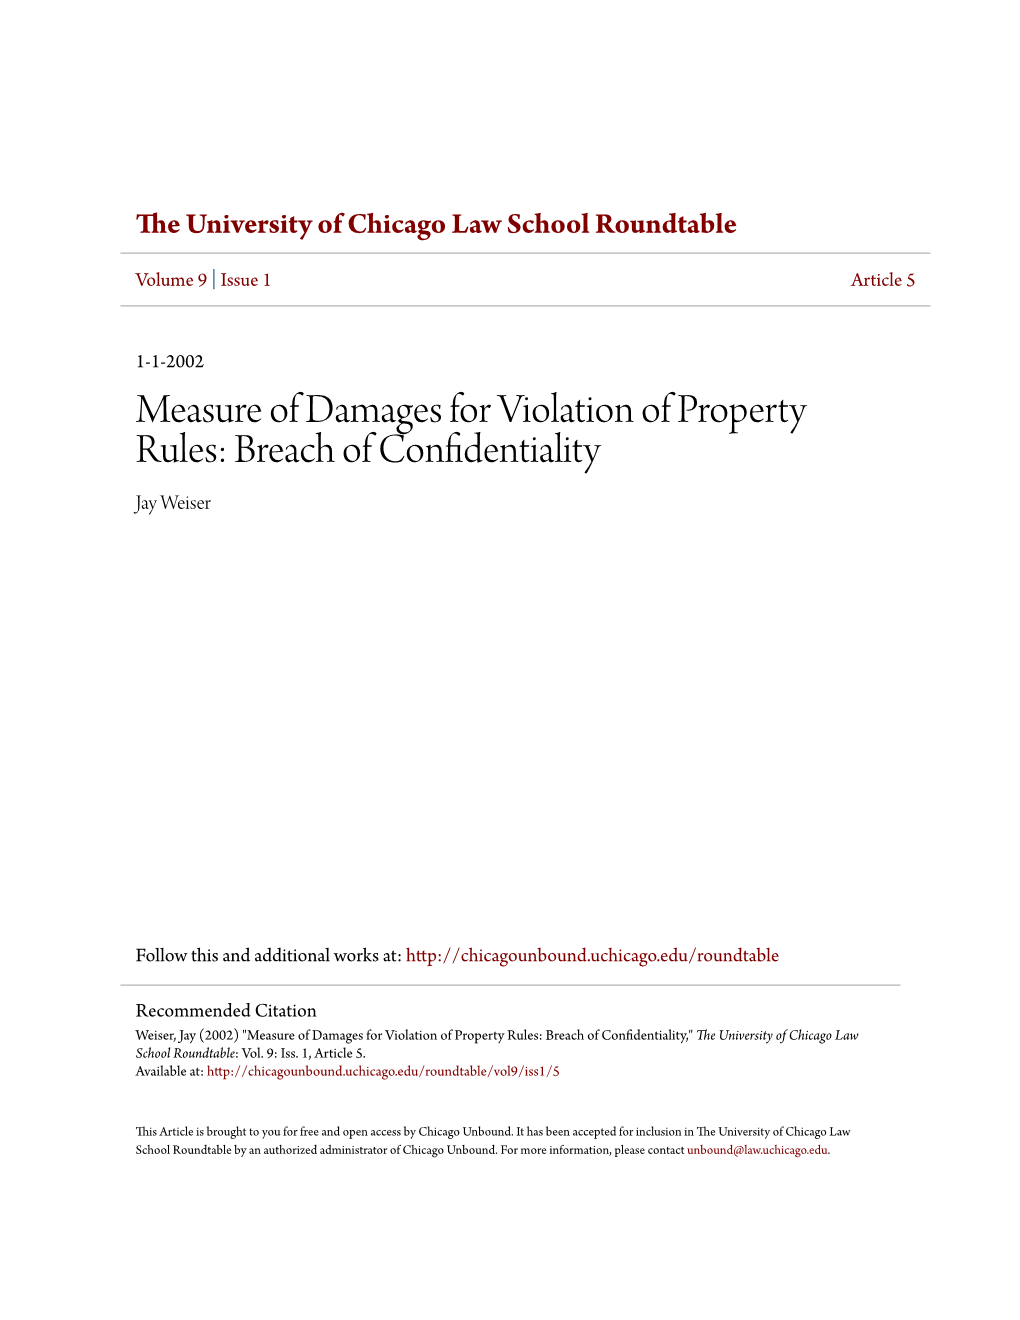 Measure of Damages for Violation of Property Rules: Breach of Confidentiality Jay Weiser